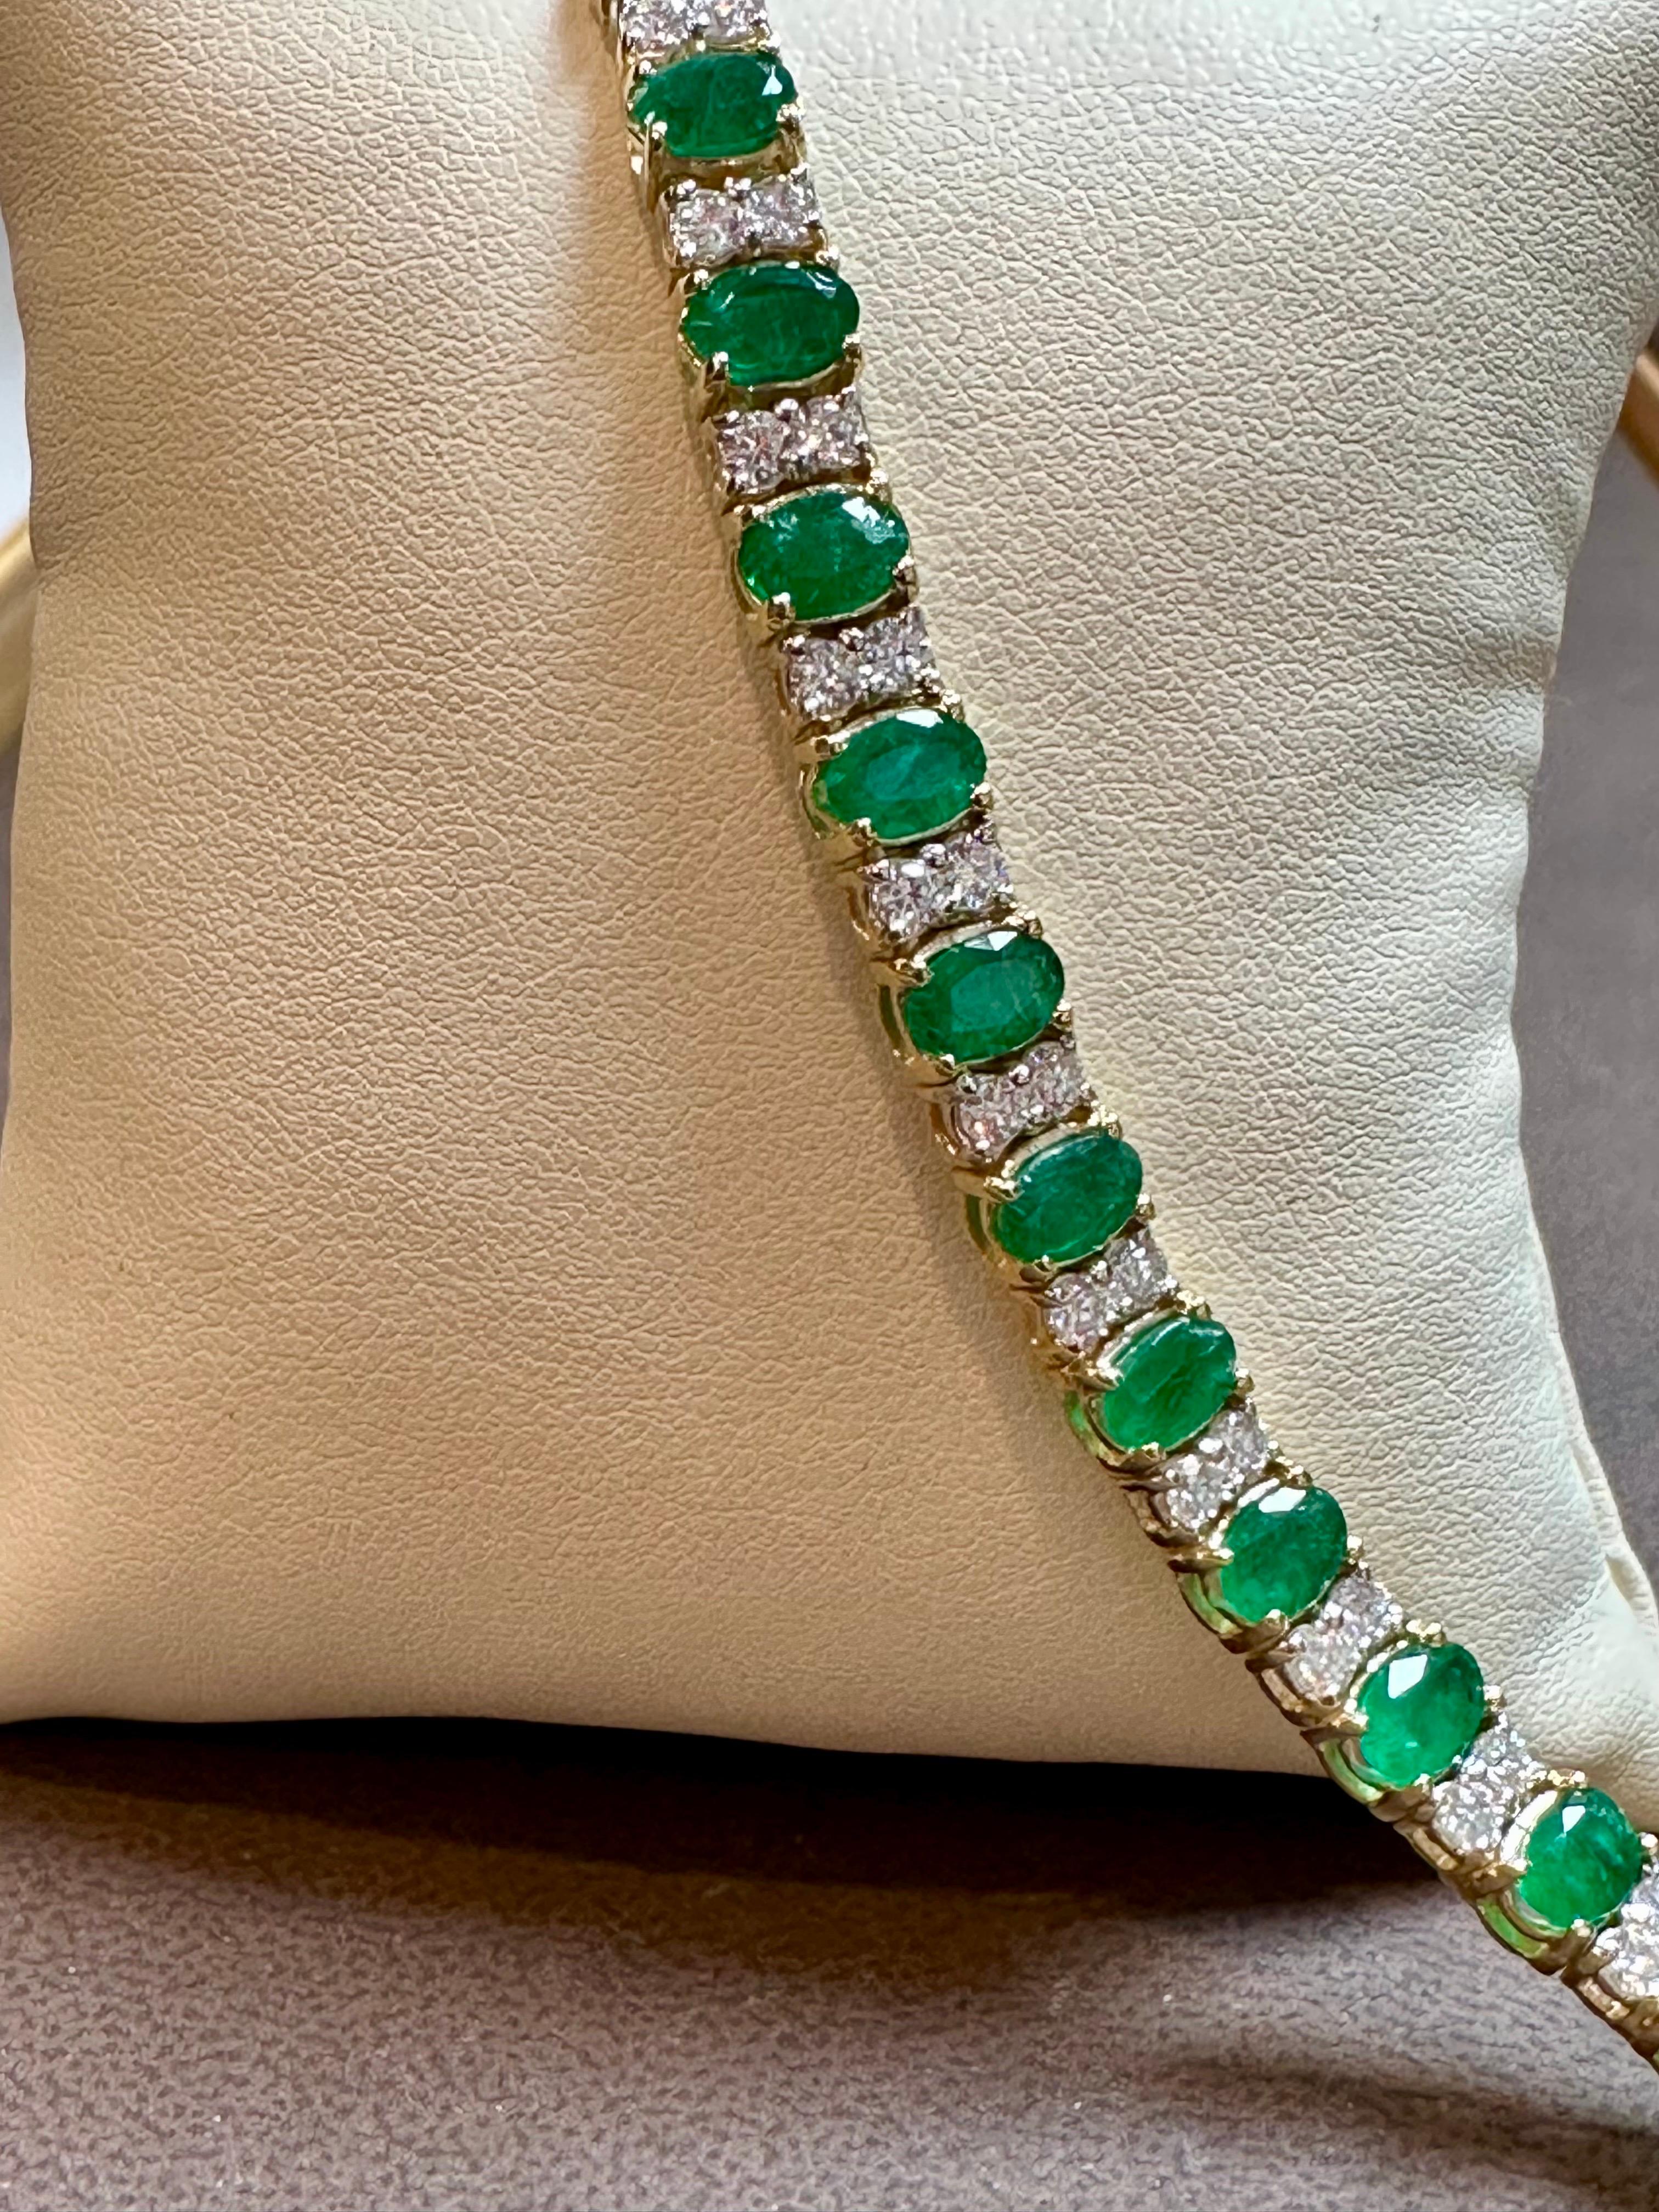 12 Carat Natural Emerald & 2.8 Carat Diamond Tennis Bracelet 14 Kt Yellow Gold
 This exceptionally affordable Tennis  bracelet has  22 stones of  Natural  oval shape High quality  Emeralds  . Each Emerald is spaced by two diamonds .Total weight of